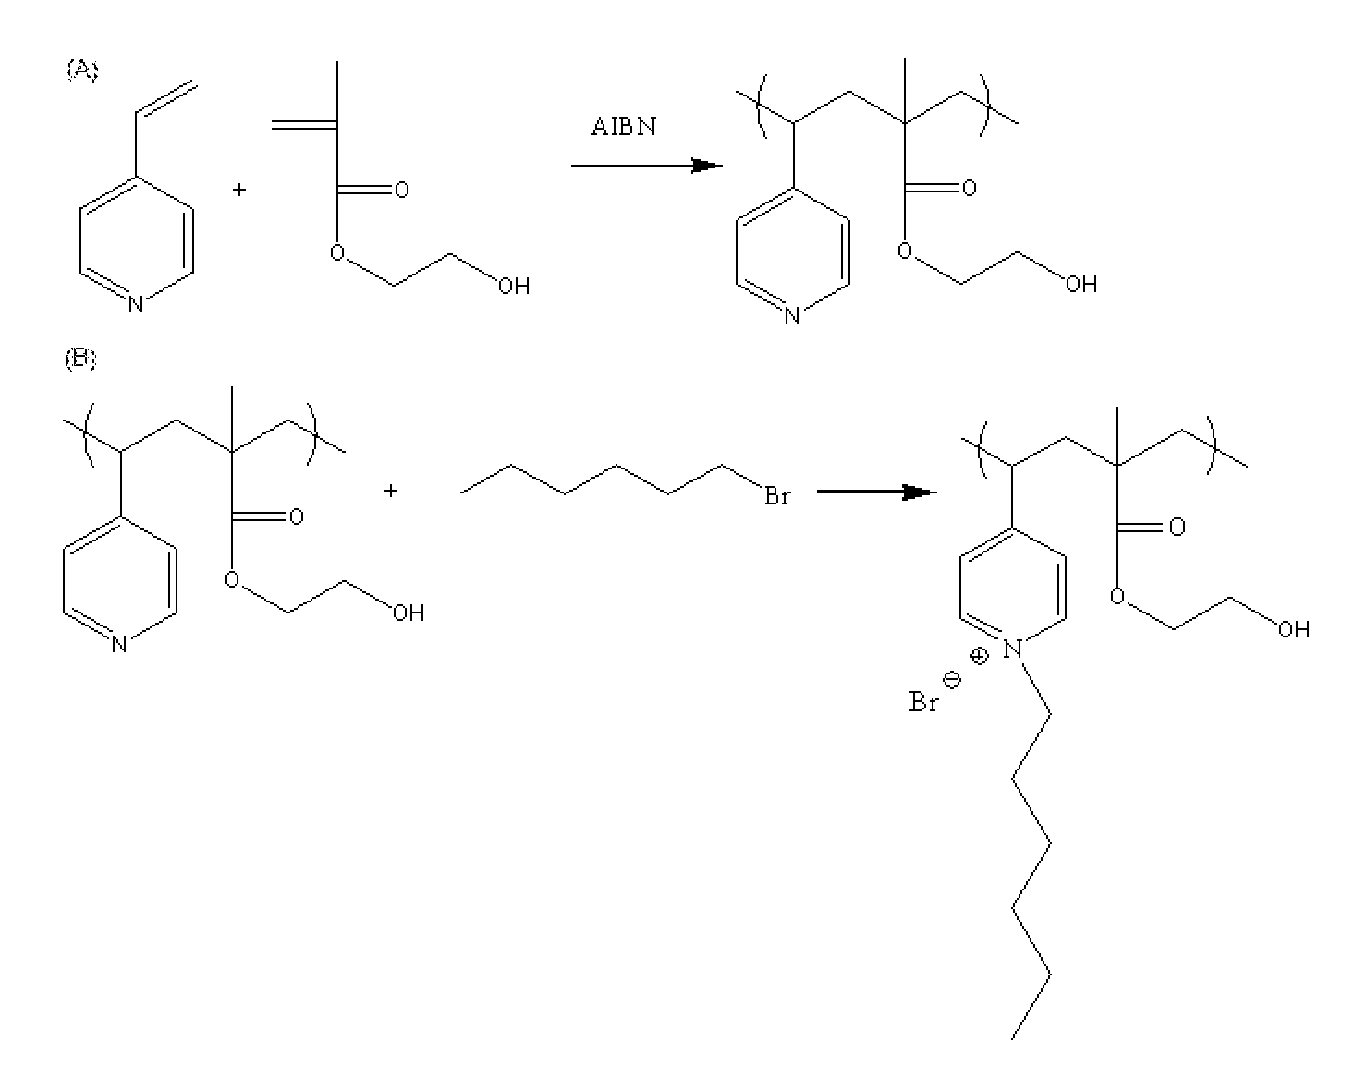 Hydrophilized antimicrobial polymers